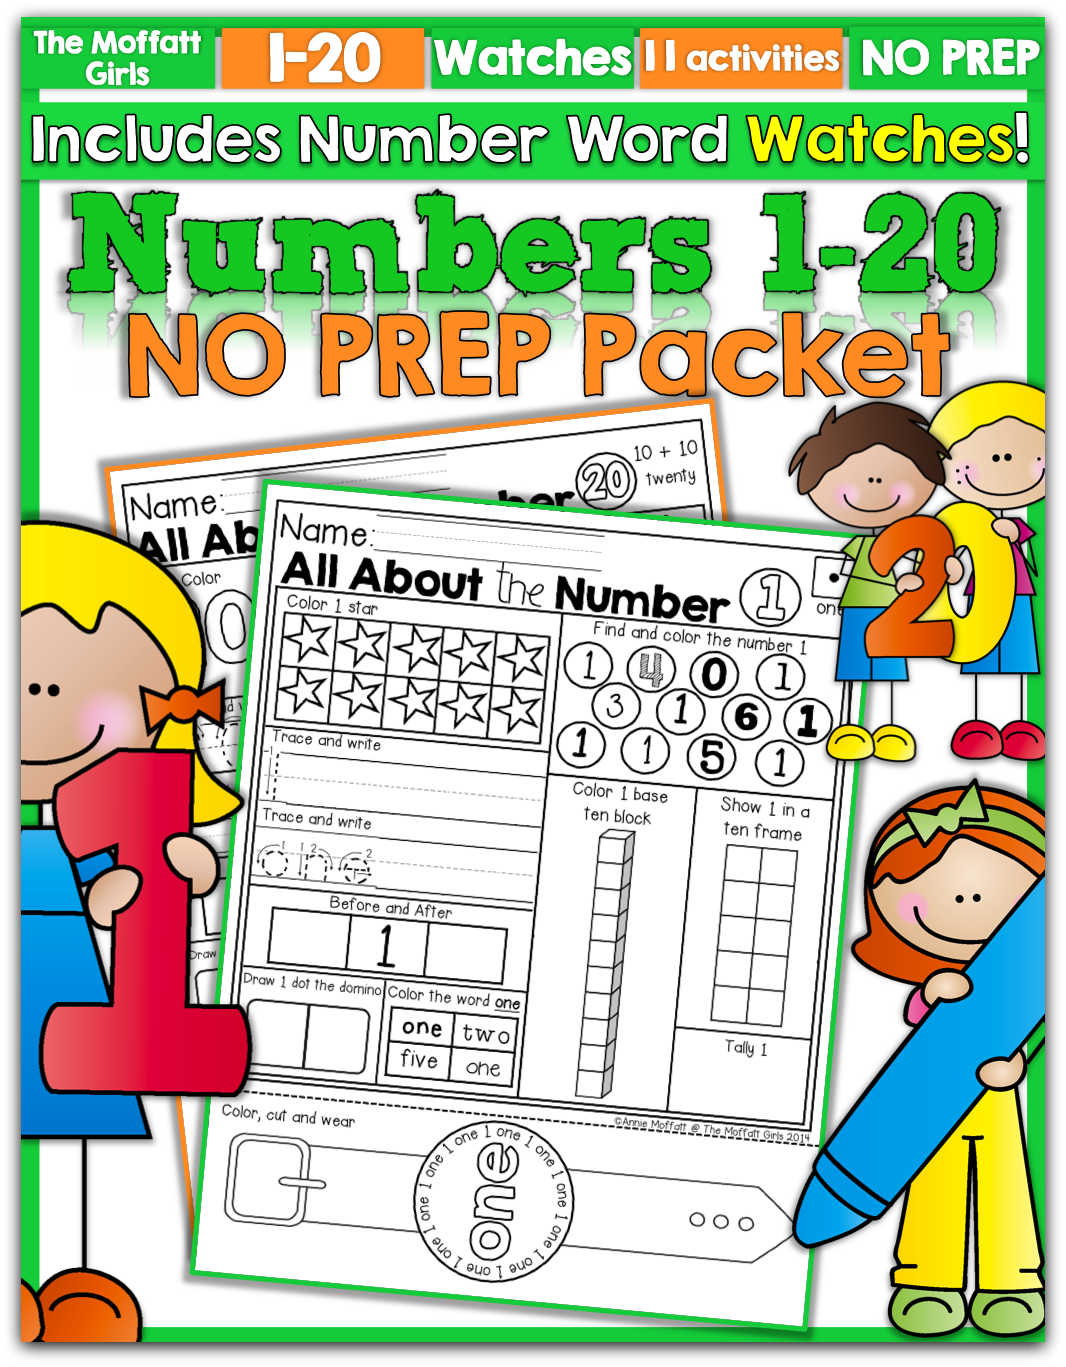 Mathematics Package 1 - Learning Numbers 1 to 10